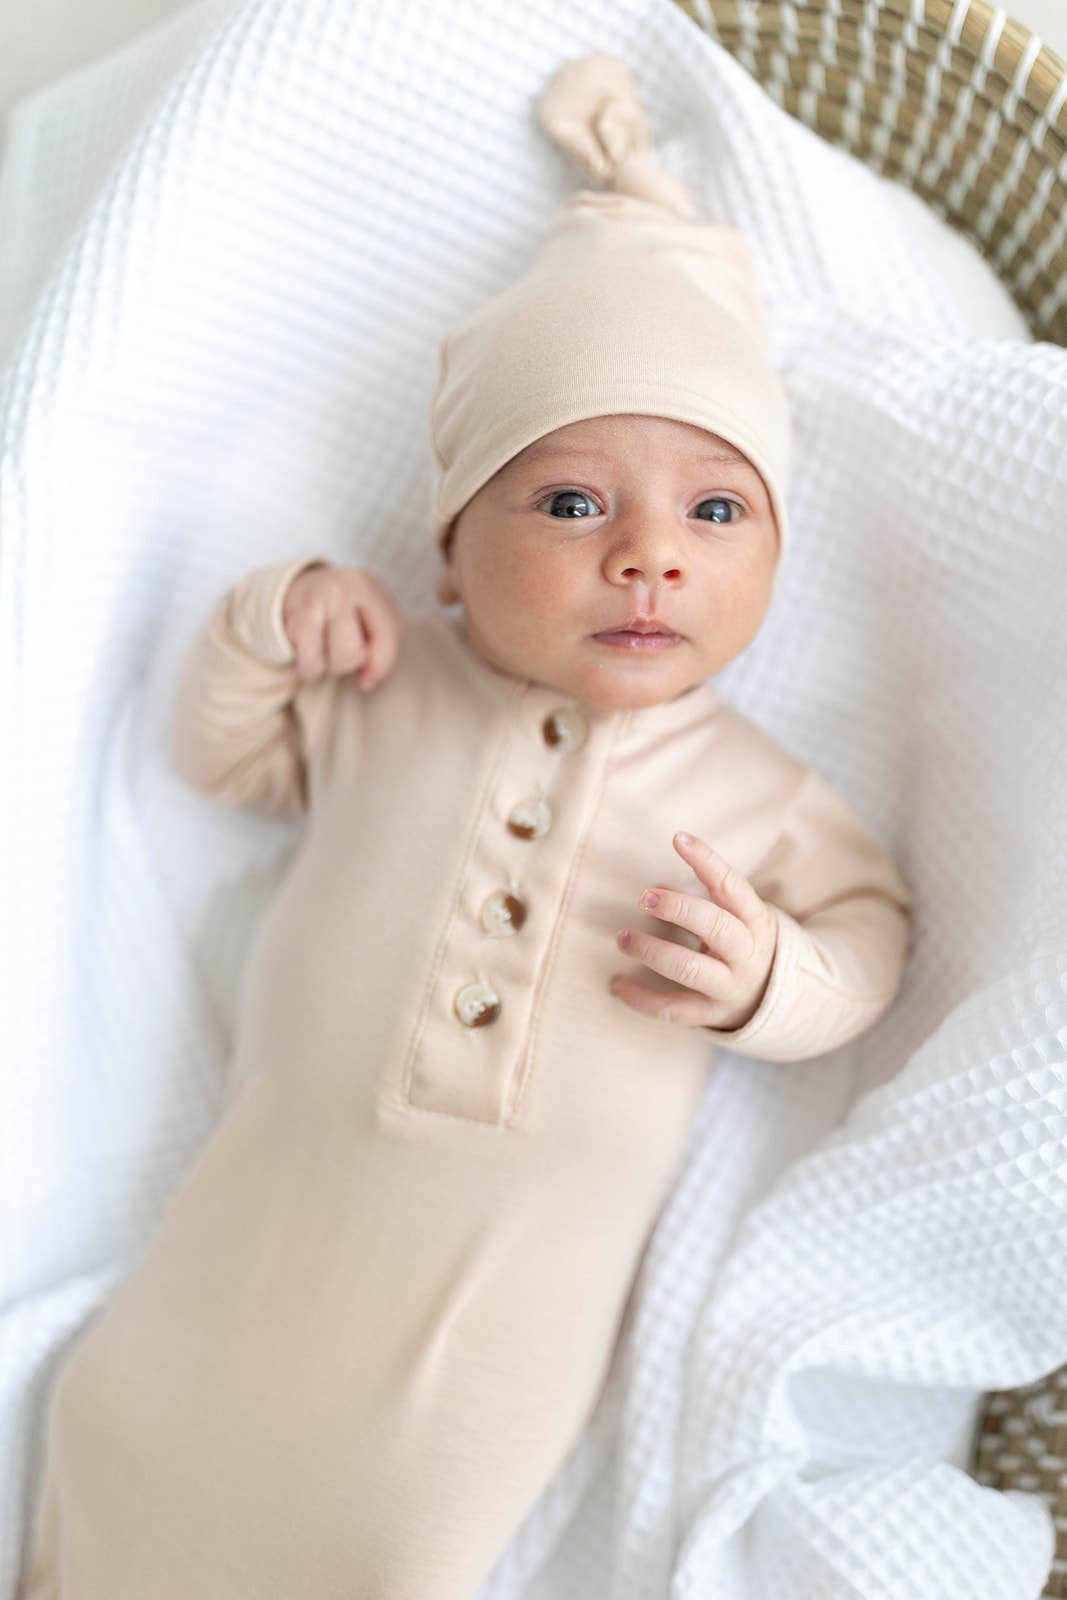 Knotted Baby Gown Set (Newborn - 3 mo.) Baby Clothes - Sand: Hat